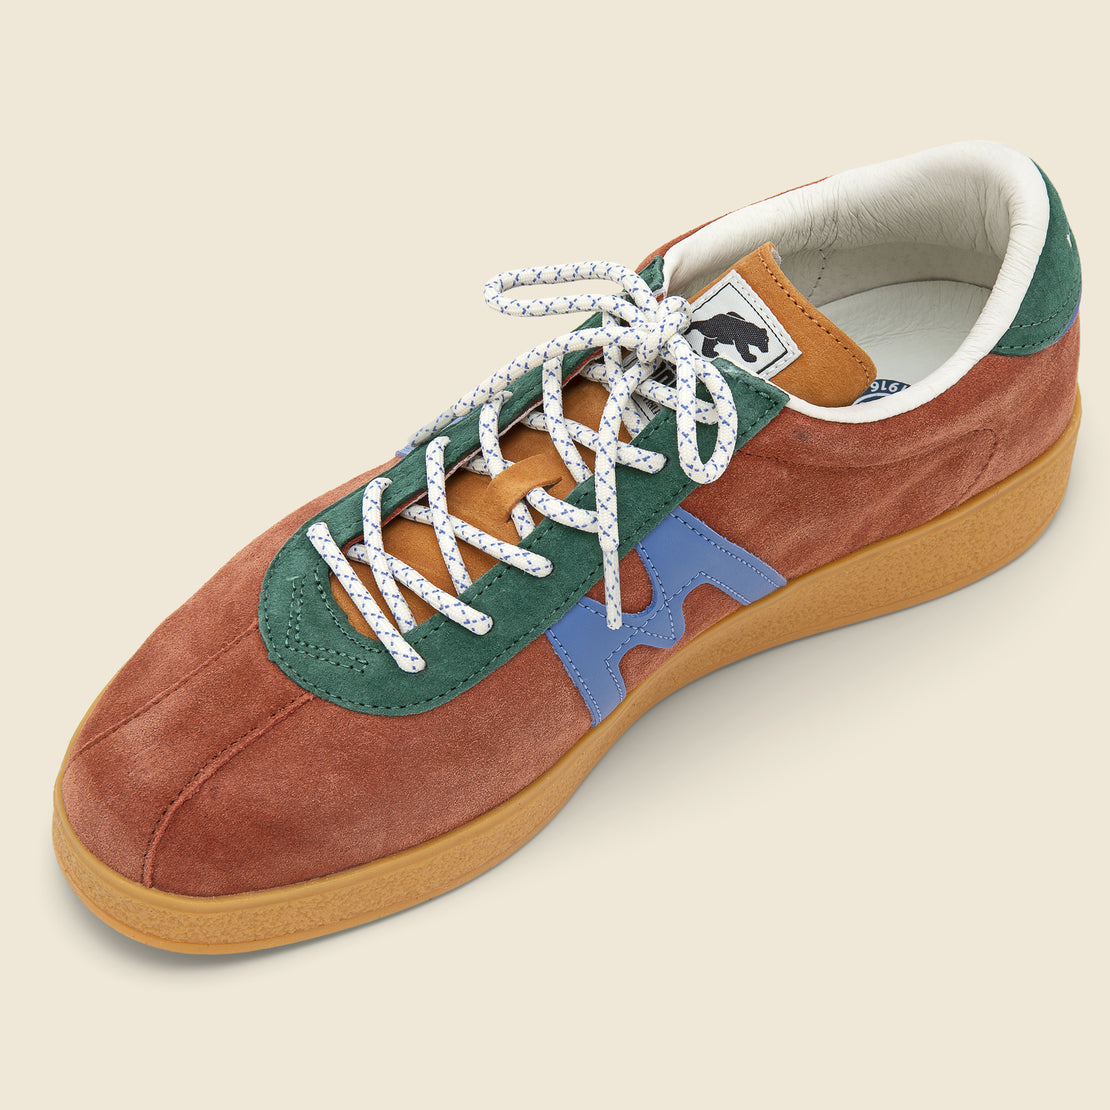 Trampas Sneaker - Baked Clay/Riviera - Karhu - STAG Provisions - Shoes - Athletic